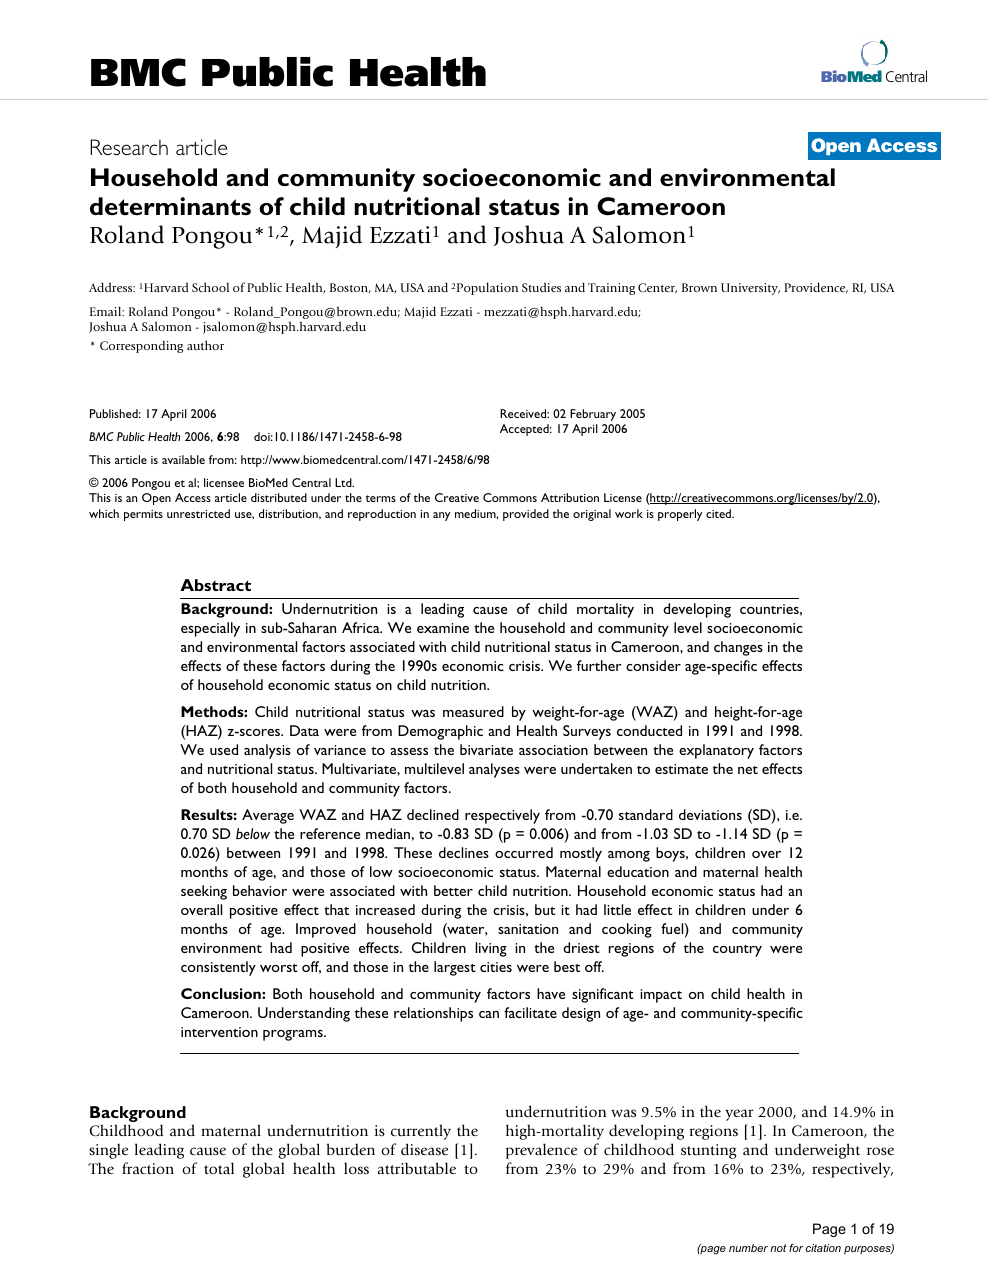 Household and community socioeconomic and environmental of child nutritional status in Cameroon – topic research paper in sciences. Download scholarly article and read for free on CyberLeninka open